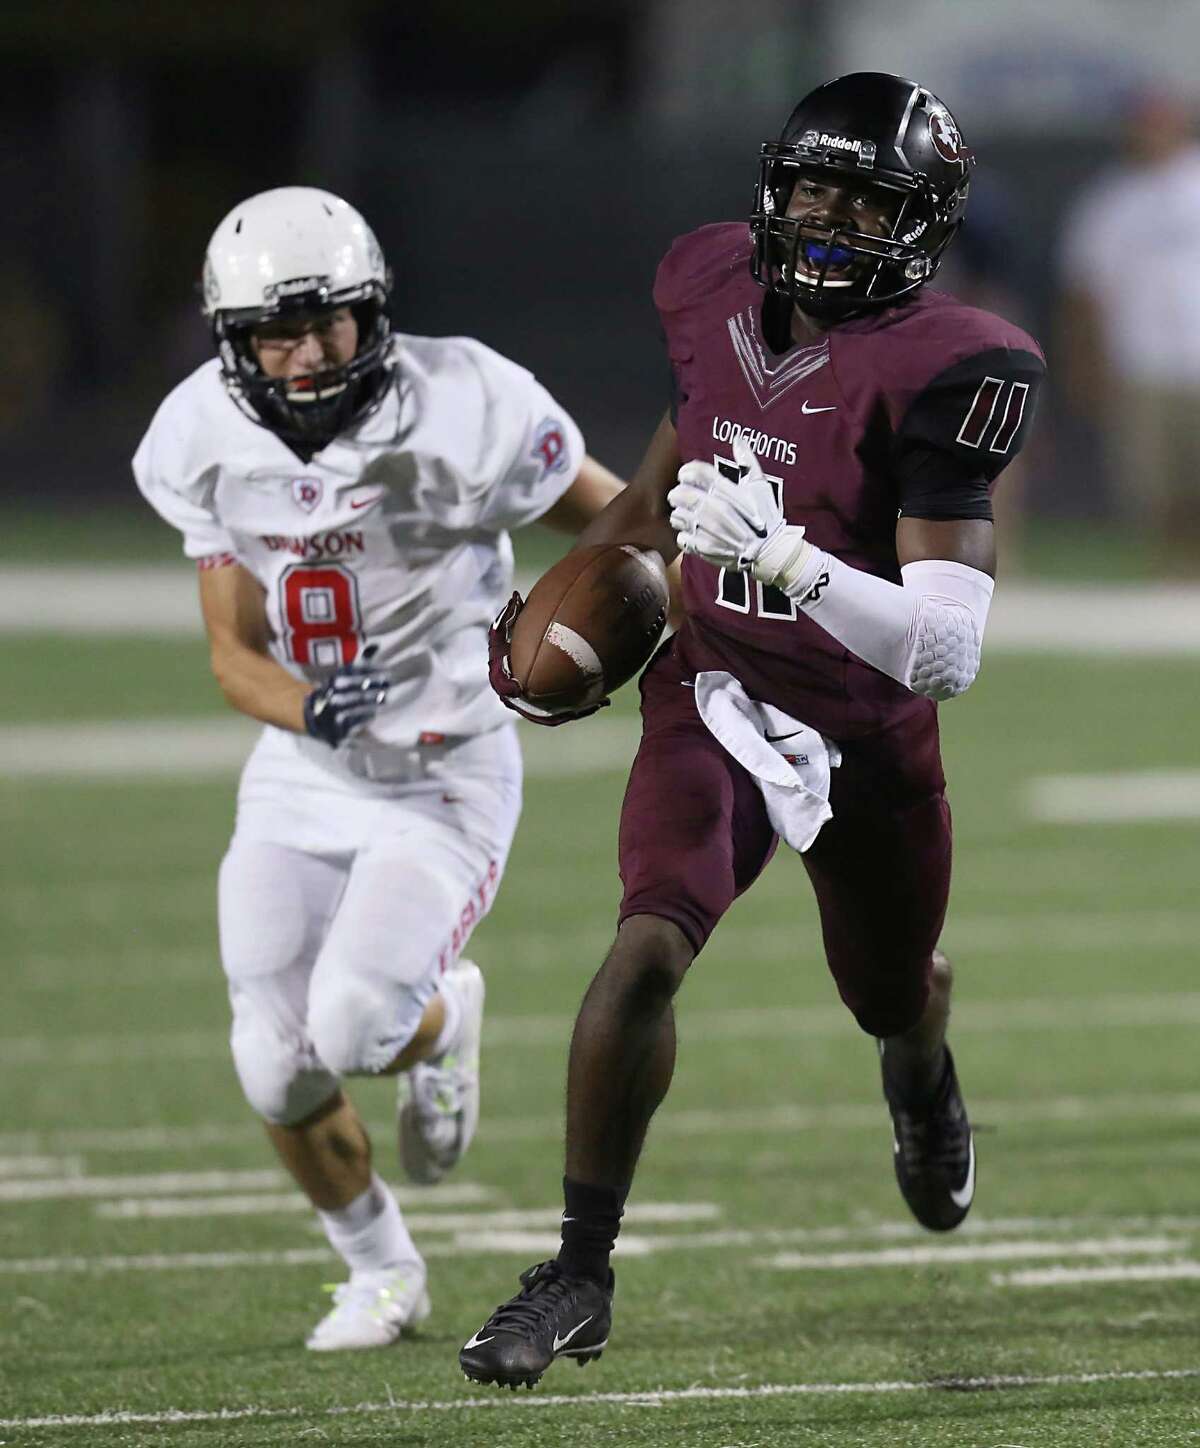 George Ranch defensive back Jairon McVea﻿ returns an interception 27 yards for a touchdown during the Longhorns' win over Dawson on Friday night.